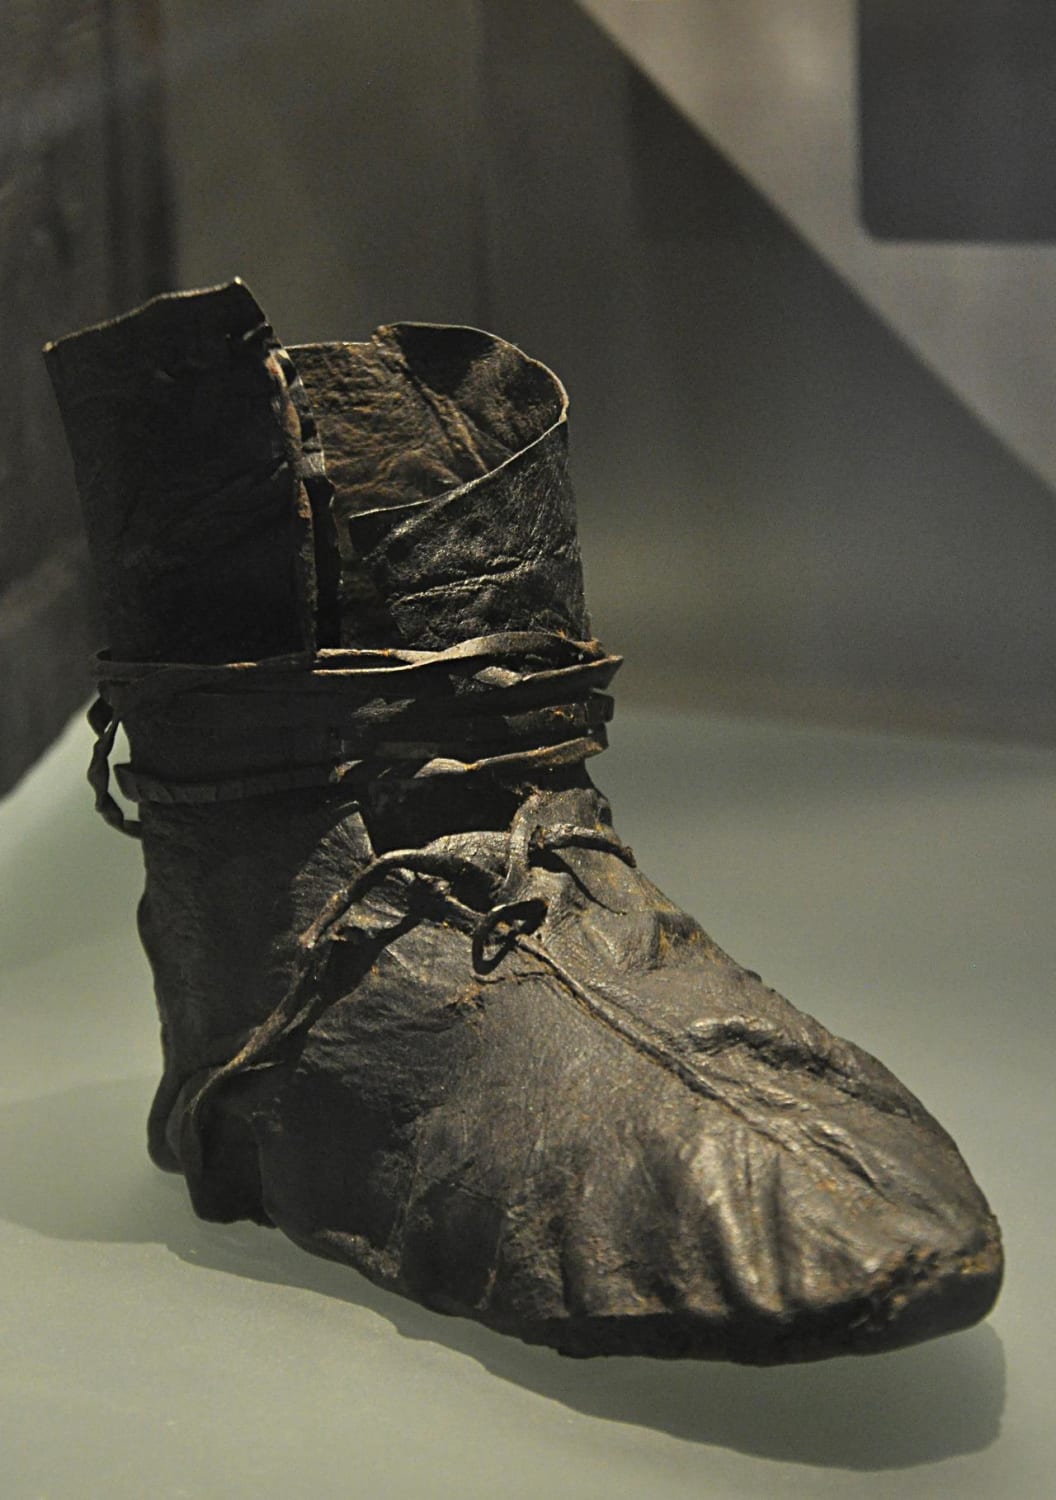 A Viking Boot from a ship-burial, Oseberg, Norway 9th-10th Century.